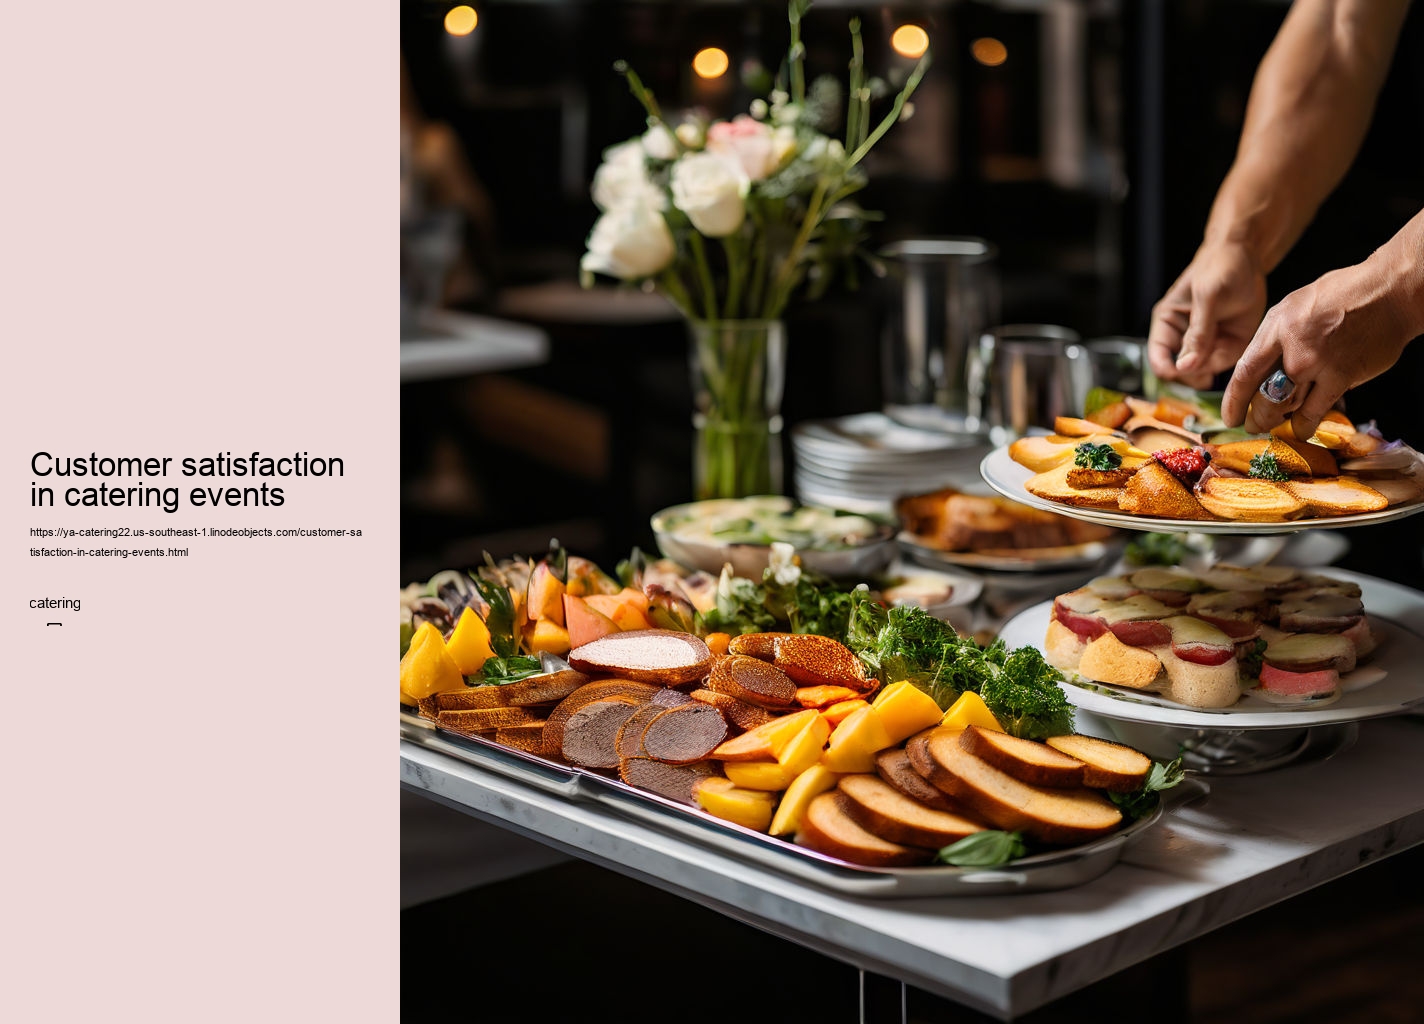 Customer satisfaction in catering events